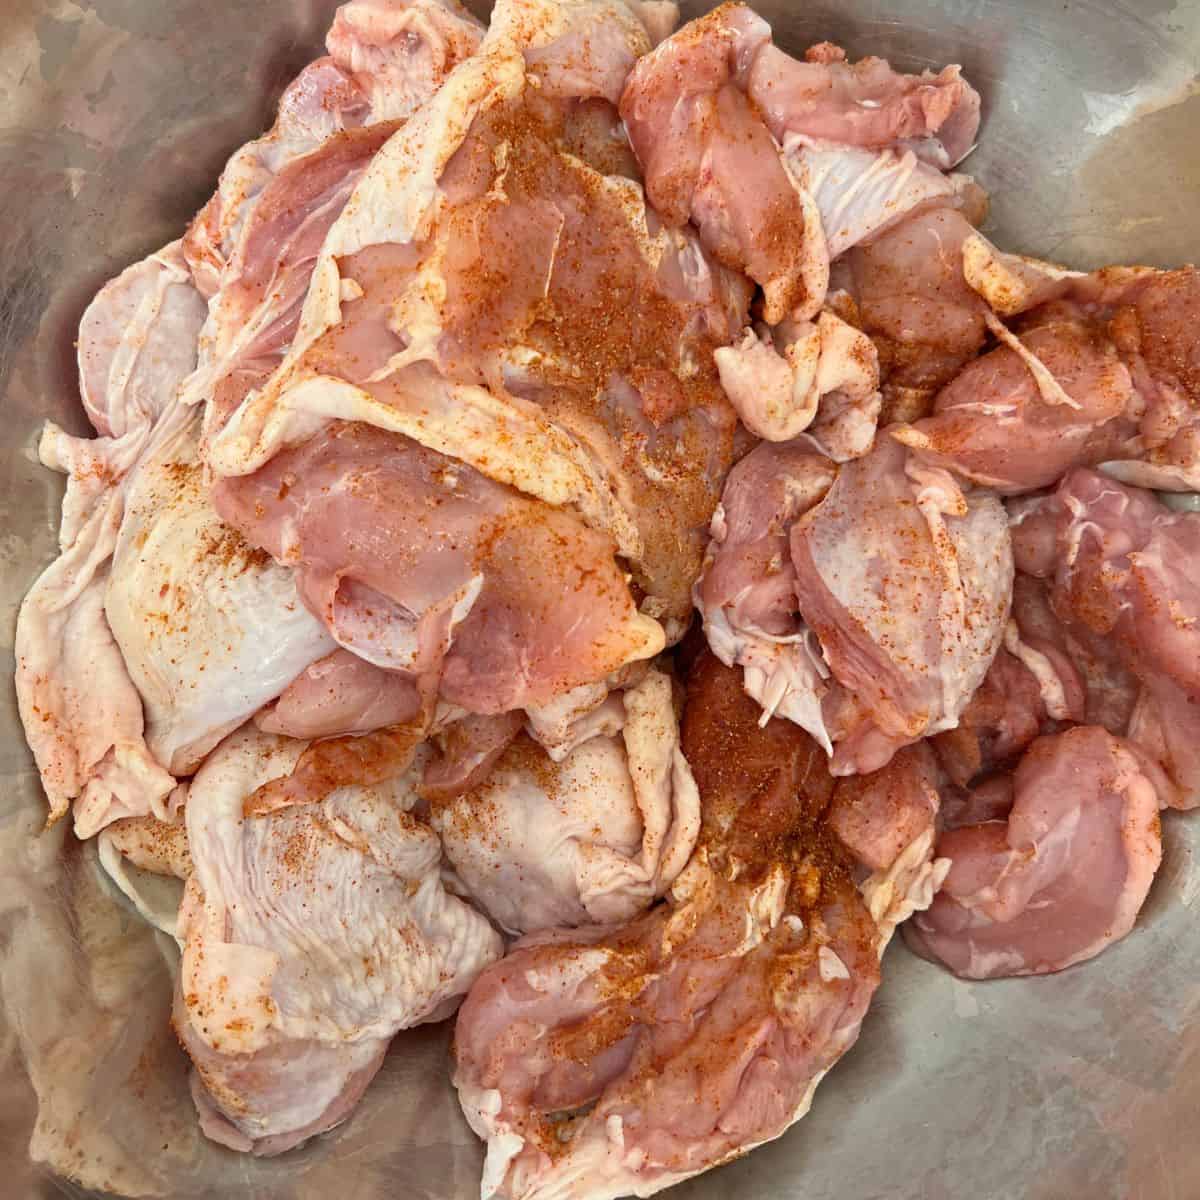 Raw chicken with dry rub in a metal bowl.